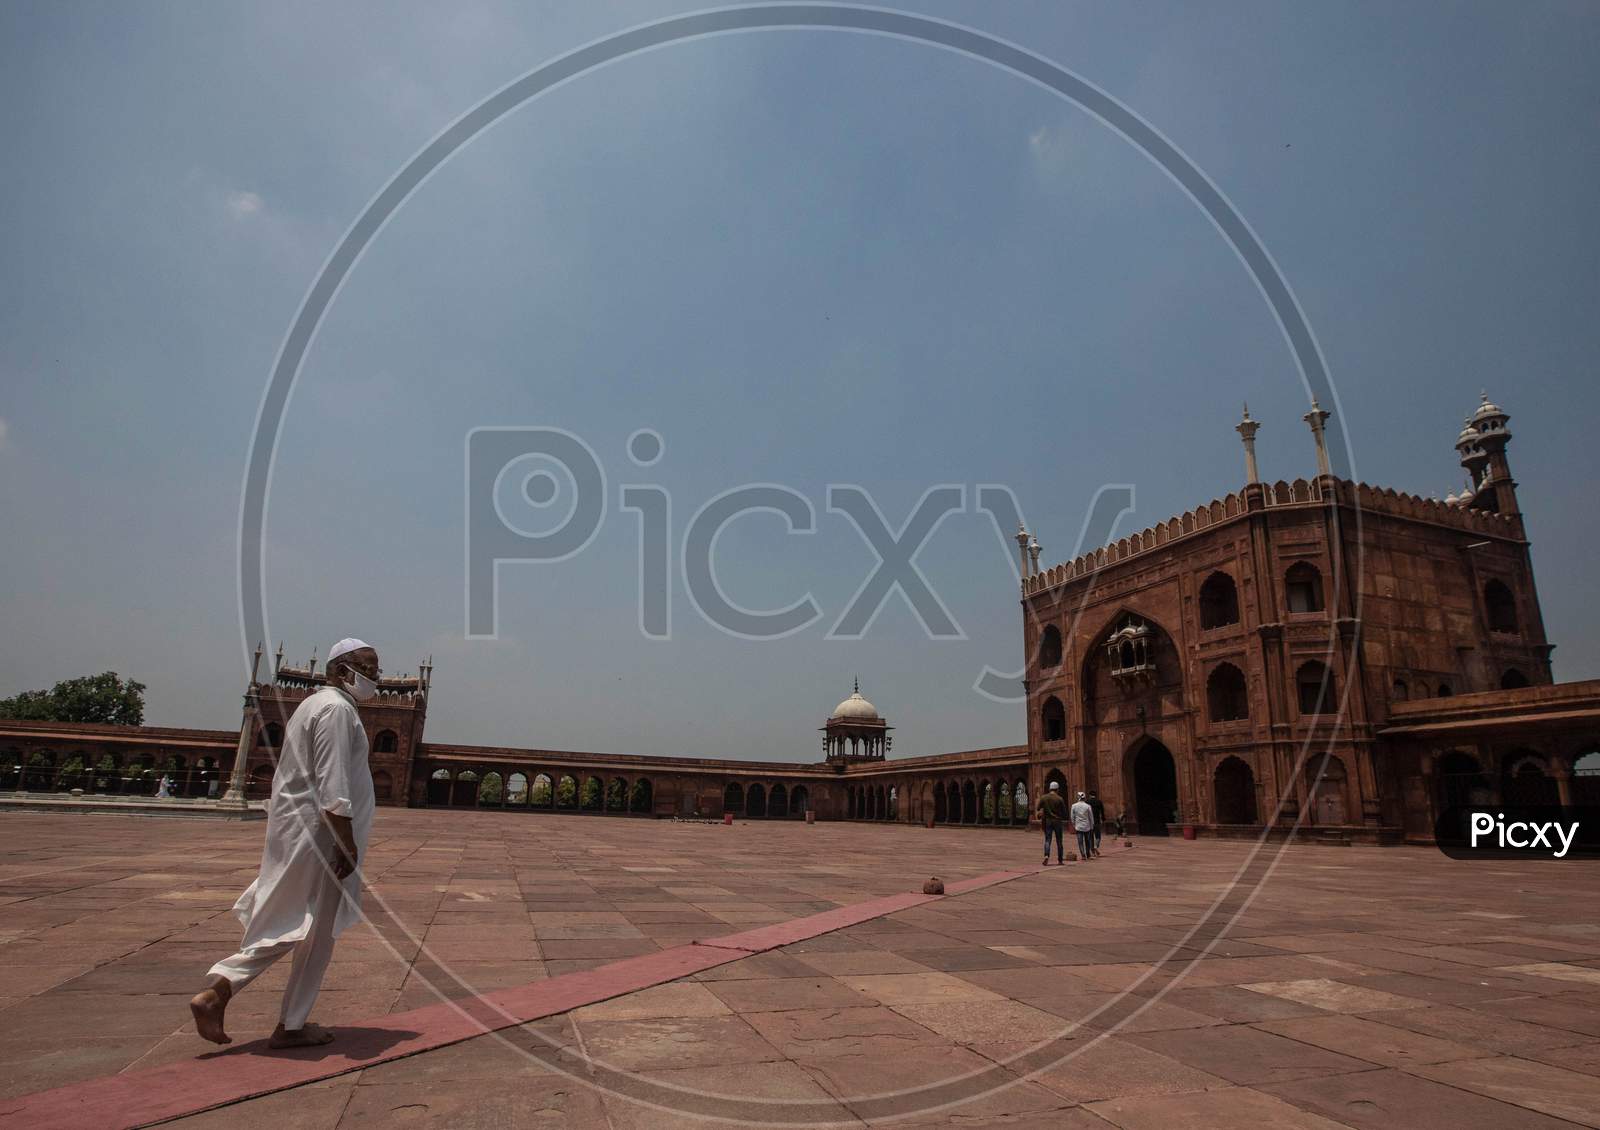 Muslims Walk Towards Jama Masjid After The Opening Of Most Of The Religious Places As India Eases Lockdown Restrictions That Were Imposed To Slow The Spread Of The Coronavirus Disease (Covid-19), In The Old Quarters Of Delhi, India, June 8, 2020.